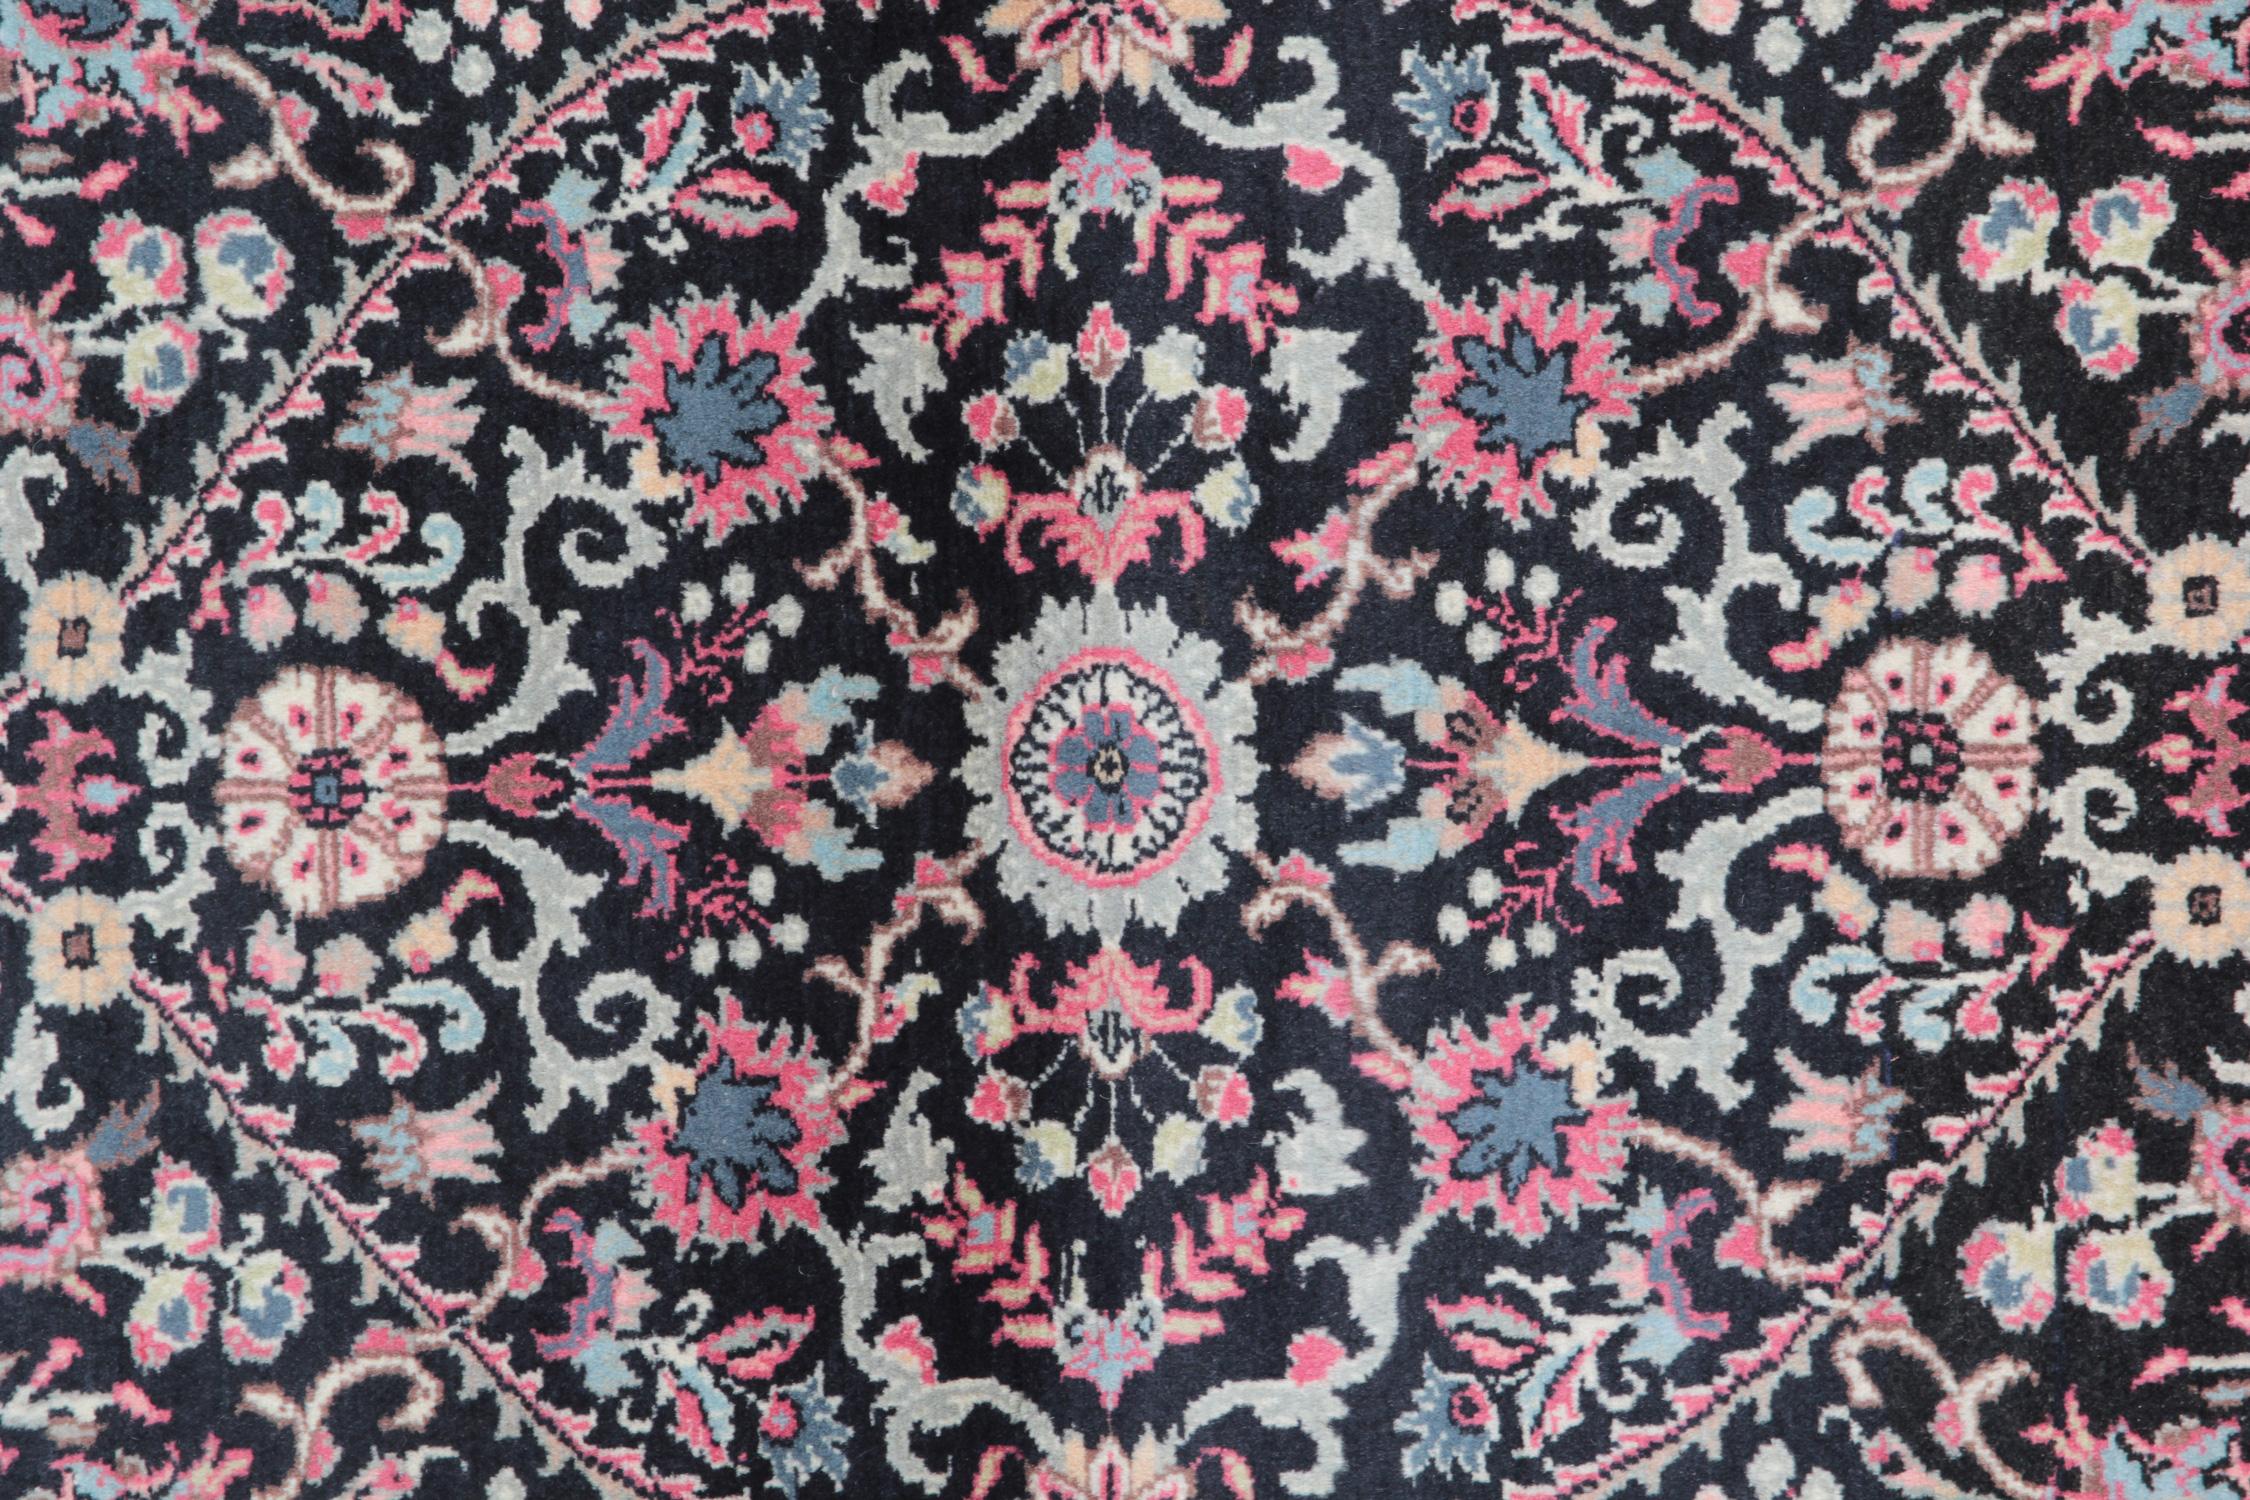 Indian carpet rugs from Punjab in a very interesting patterned rugs design. Woven with Classic colours from this period of Indian weaving, using vivid natural navy and pink. The Floral rugs are the wonderful drawing of leaves and garden and surround